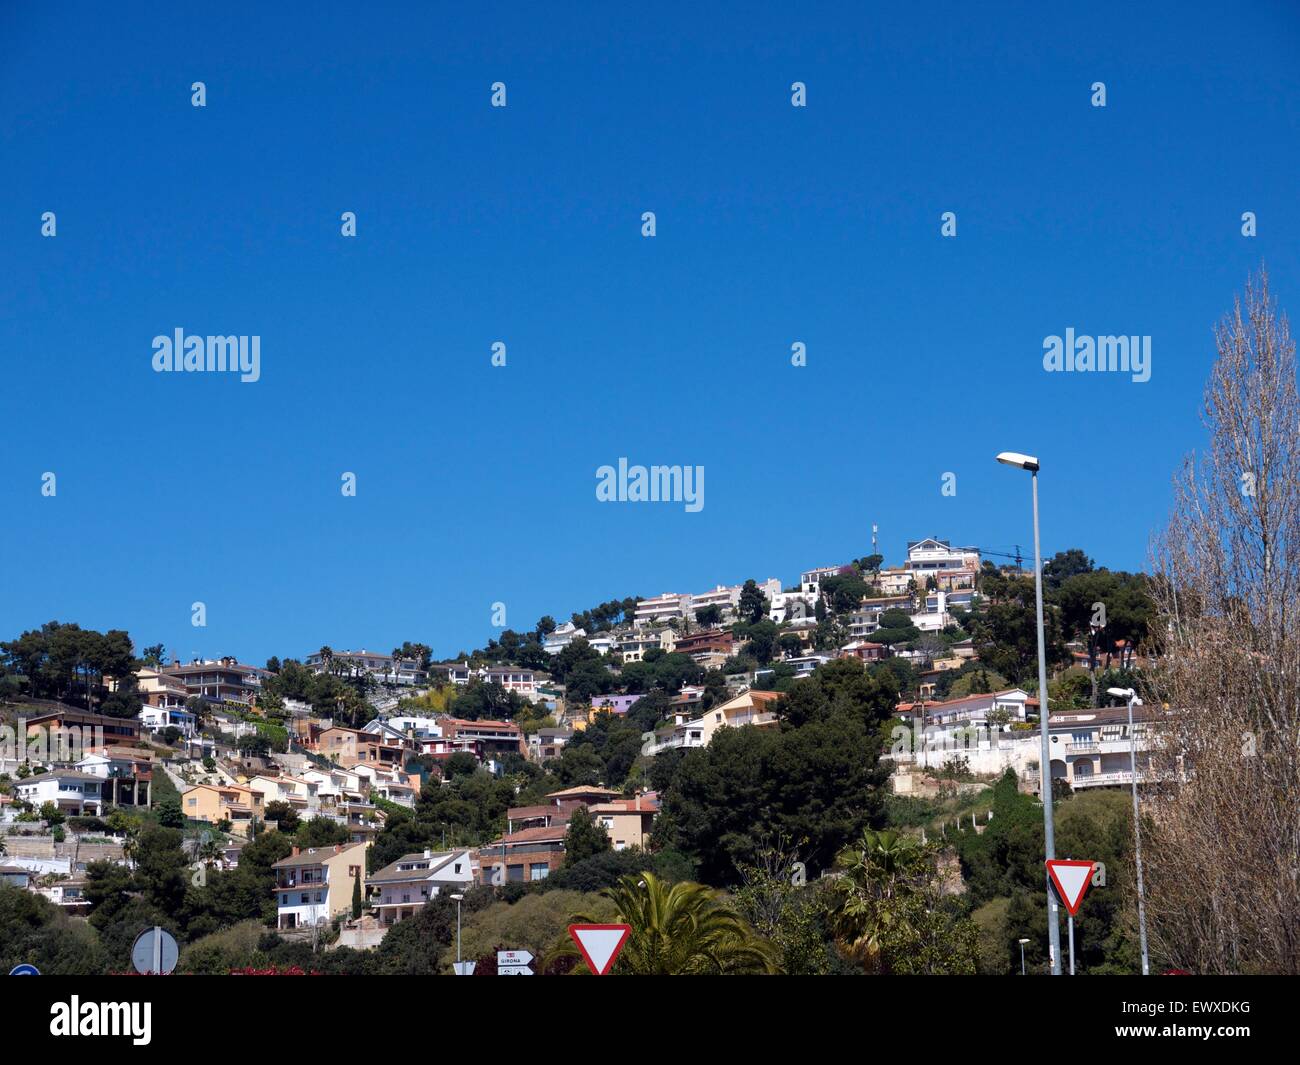 Houses on a hill in Spain with a Blue sky Stock Photo